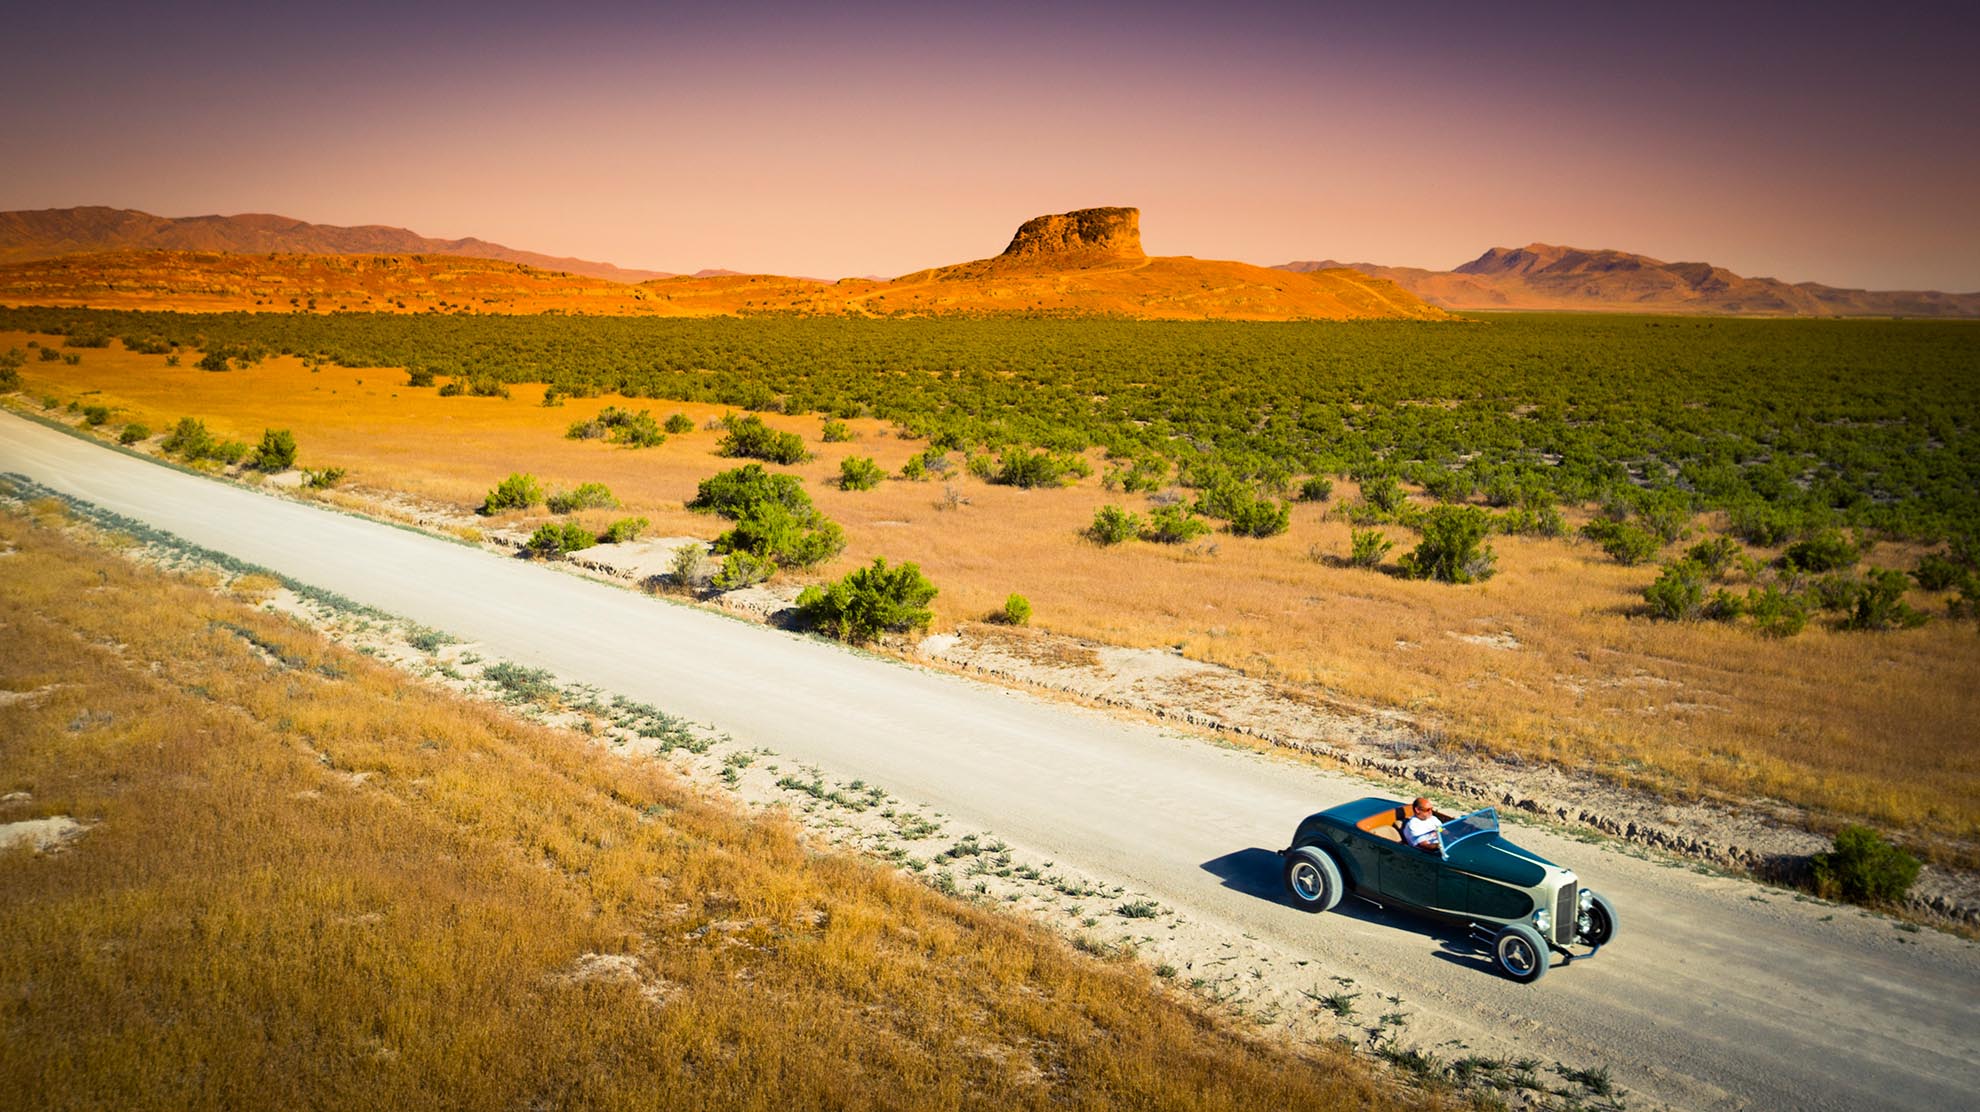 Drone Photograph of Racer Ray in Hot Rod on dirt road in Utah Desert